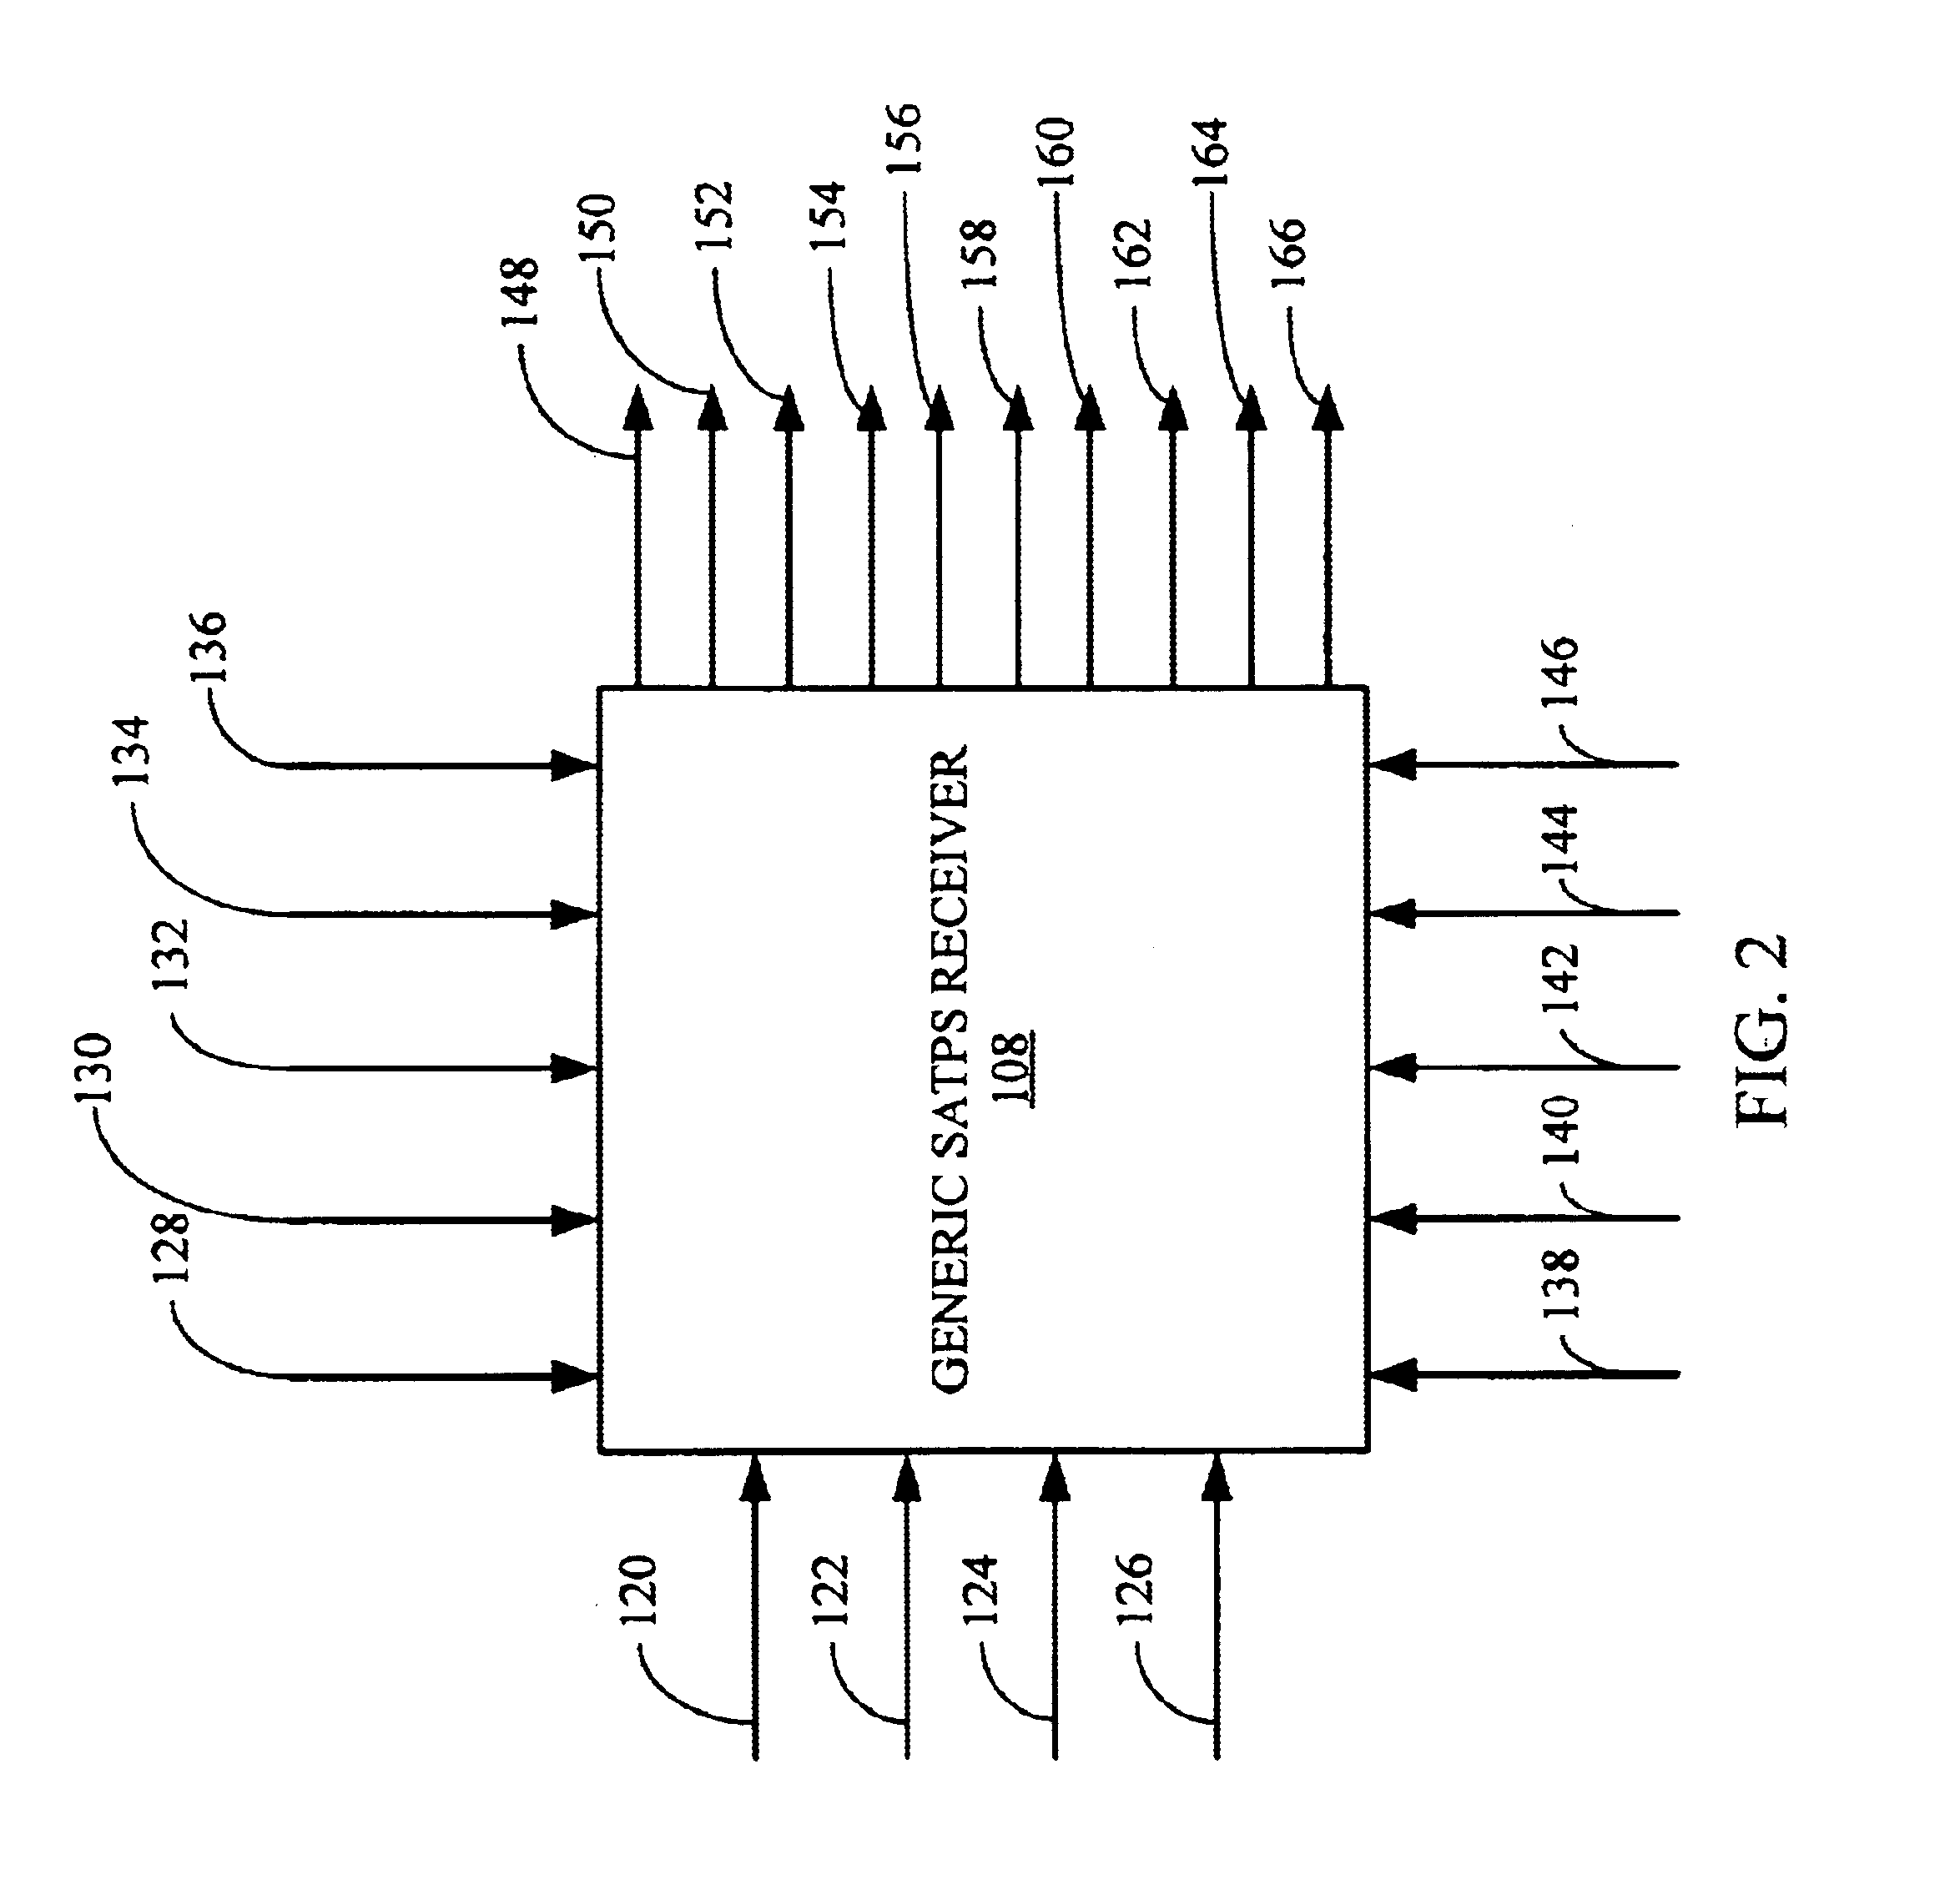 Generic satellite positioning system receivers with selective inputs and outputs